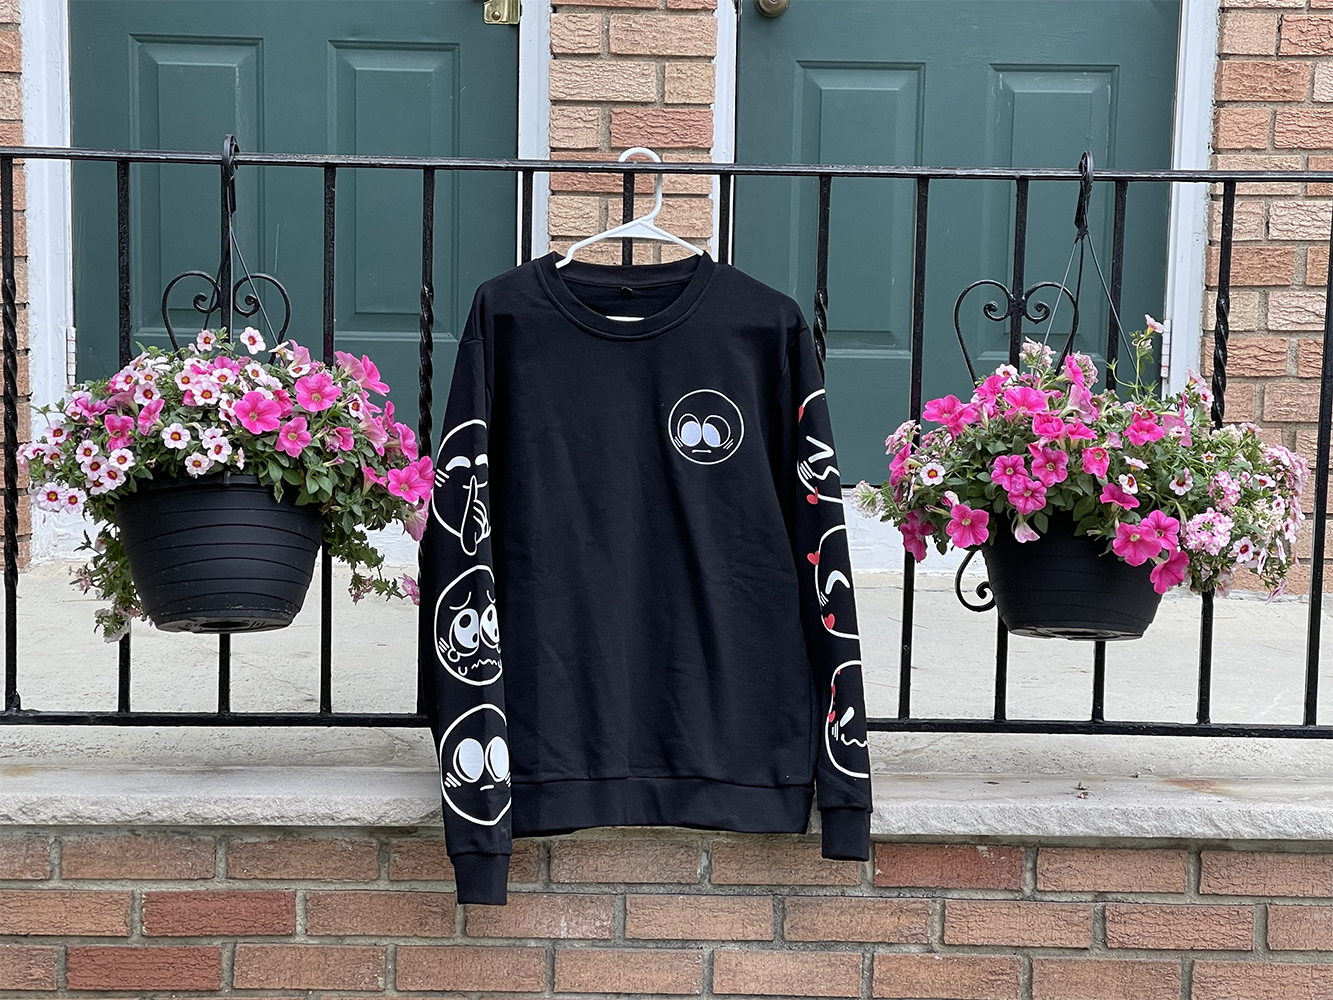 A black Nice Emoji sweater hanging outside. It features one emoji design on the front, and three on each sleeve.